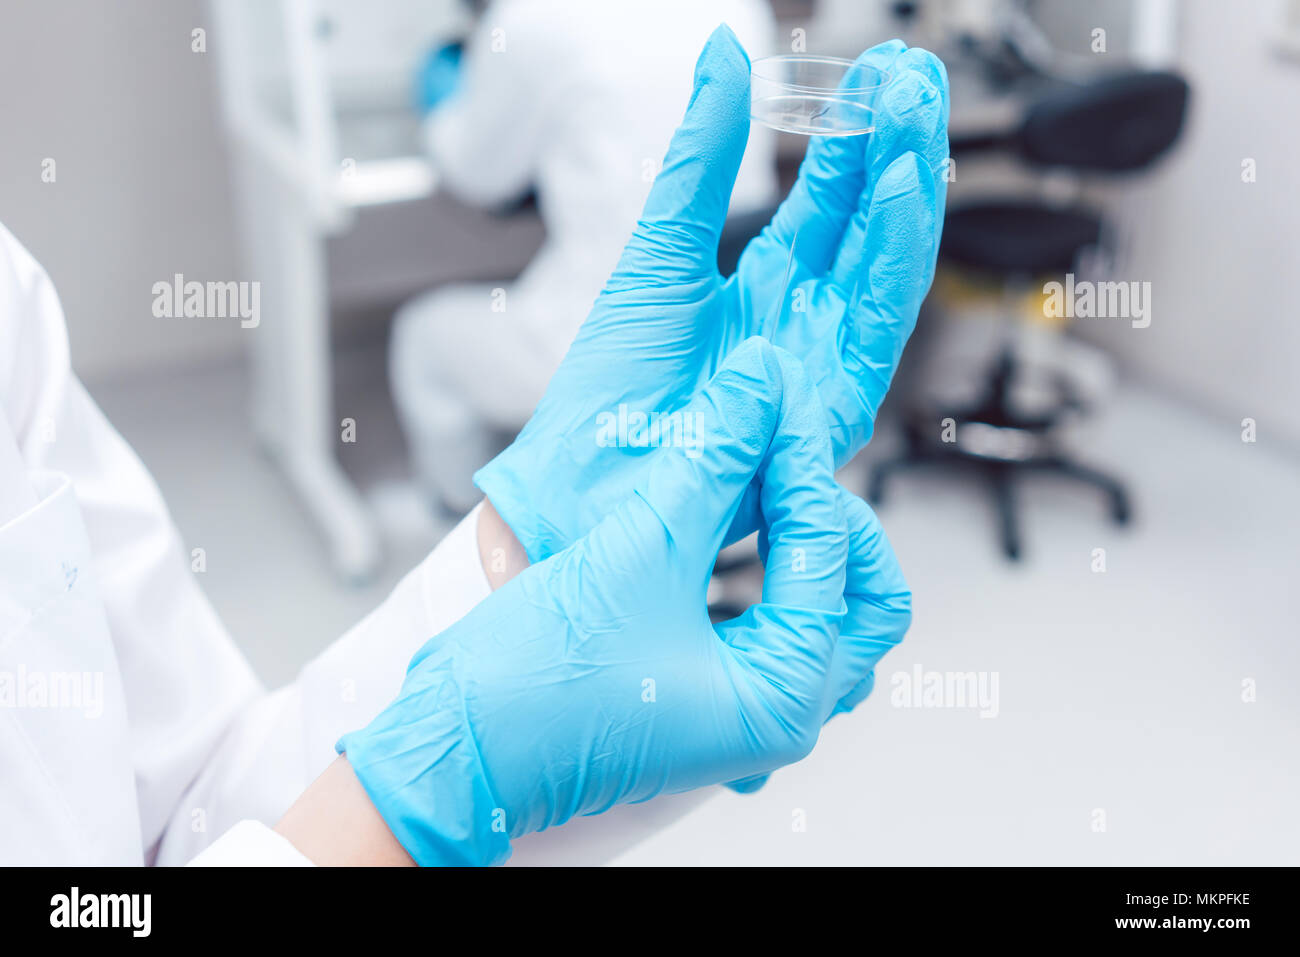 Fertility lab with technician holding tools for fertilizing human eggs Stock Photo